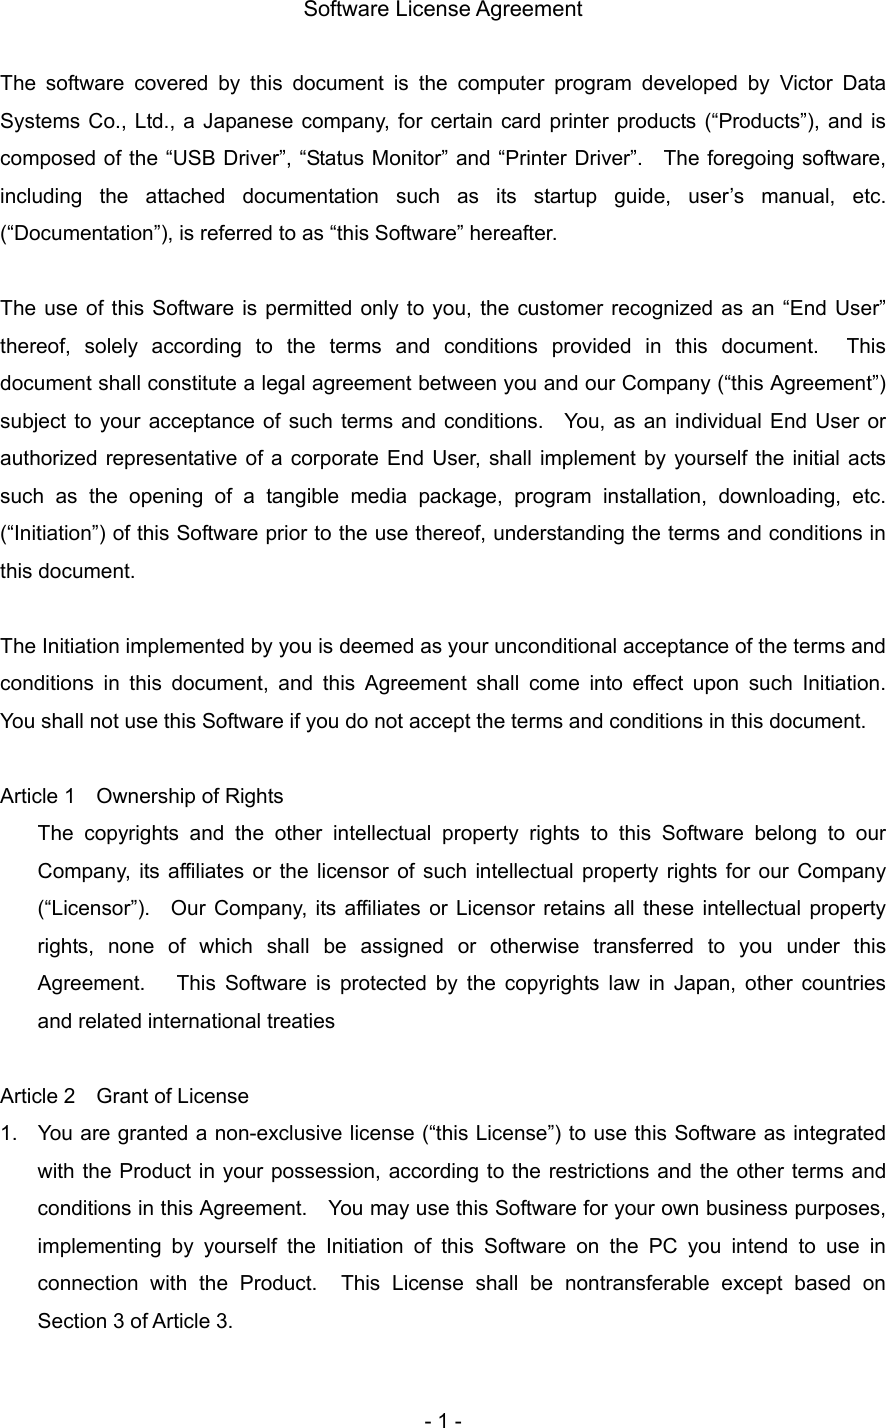   Software License Agreement  The software covered by this document is the computer program developed by Victor Data Systems Co., Ltd., a Japanese company, for certain card printer products (“Products”), and is composed of the “USB Driver”, “Status Monitor” and “Printer Driver”.  The foregoing software, including the attached documentation such as its startup guide, user’s manual, etc. (“Documentation”), is referred to as “this Software” hereafter.    The use of this Software is permitted only to you, the customer recognized as an “End User” thereof, solely according to the terms and conditions provided in this document.  This document shall constitute a legal agreement between you and our Company (“this Agreement”) subject to your acceptance of such terms and conditions.   You, as an individual End User or authorized representative of a corporate End User, shall implement by yourself the initial acts such as the opening of a tangible media package, program installation, downloading, etc. (“Initiation”) of this Software prior to the use thereof, understanding the terms and conditions in this document.  The Initiation implemented by you is deemed as your unconditional acceptance of the terms and conditions in this document, and this Agreement shall come into effect upon such Initiation.  You shall not use this Software if you do not accept the terms and conditions in this document.  Article 1    Ownership of Rights The copyrights and the other intellectual property rights to this Software belong to our Company, its affiliates or the licensor of such intellectual property rights for our Company (“Licensor”).  Our Company, its affiliates or Licensor retains all these intellectual property rights, none of which shall be assigned or otherwise transferred to you under this Agreement.   This Software is protected by the copyrights law in Japan, other countries and related international treaties  Article 2    Grant of License 1.  You are granted a non-exclusive license (“this License”) to use this Software as integrated with the Product in your possession, according to the restrictions and the other terms and conditions in this Agreement.    You may use this Software for your own business purposes, implementing by yourself the Initiation of this Software on the PC you intend to use in connection with the Product.  This License shall be nontransferable except based on Section 3 of Article 3.   - 1 - 